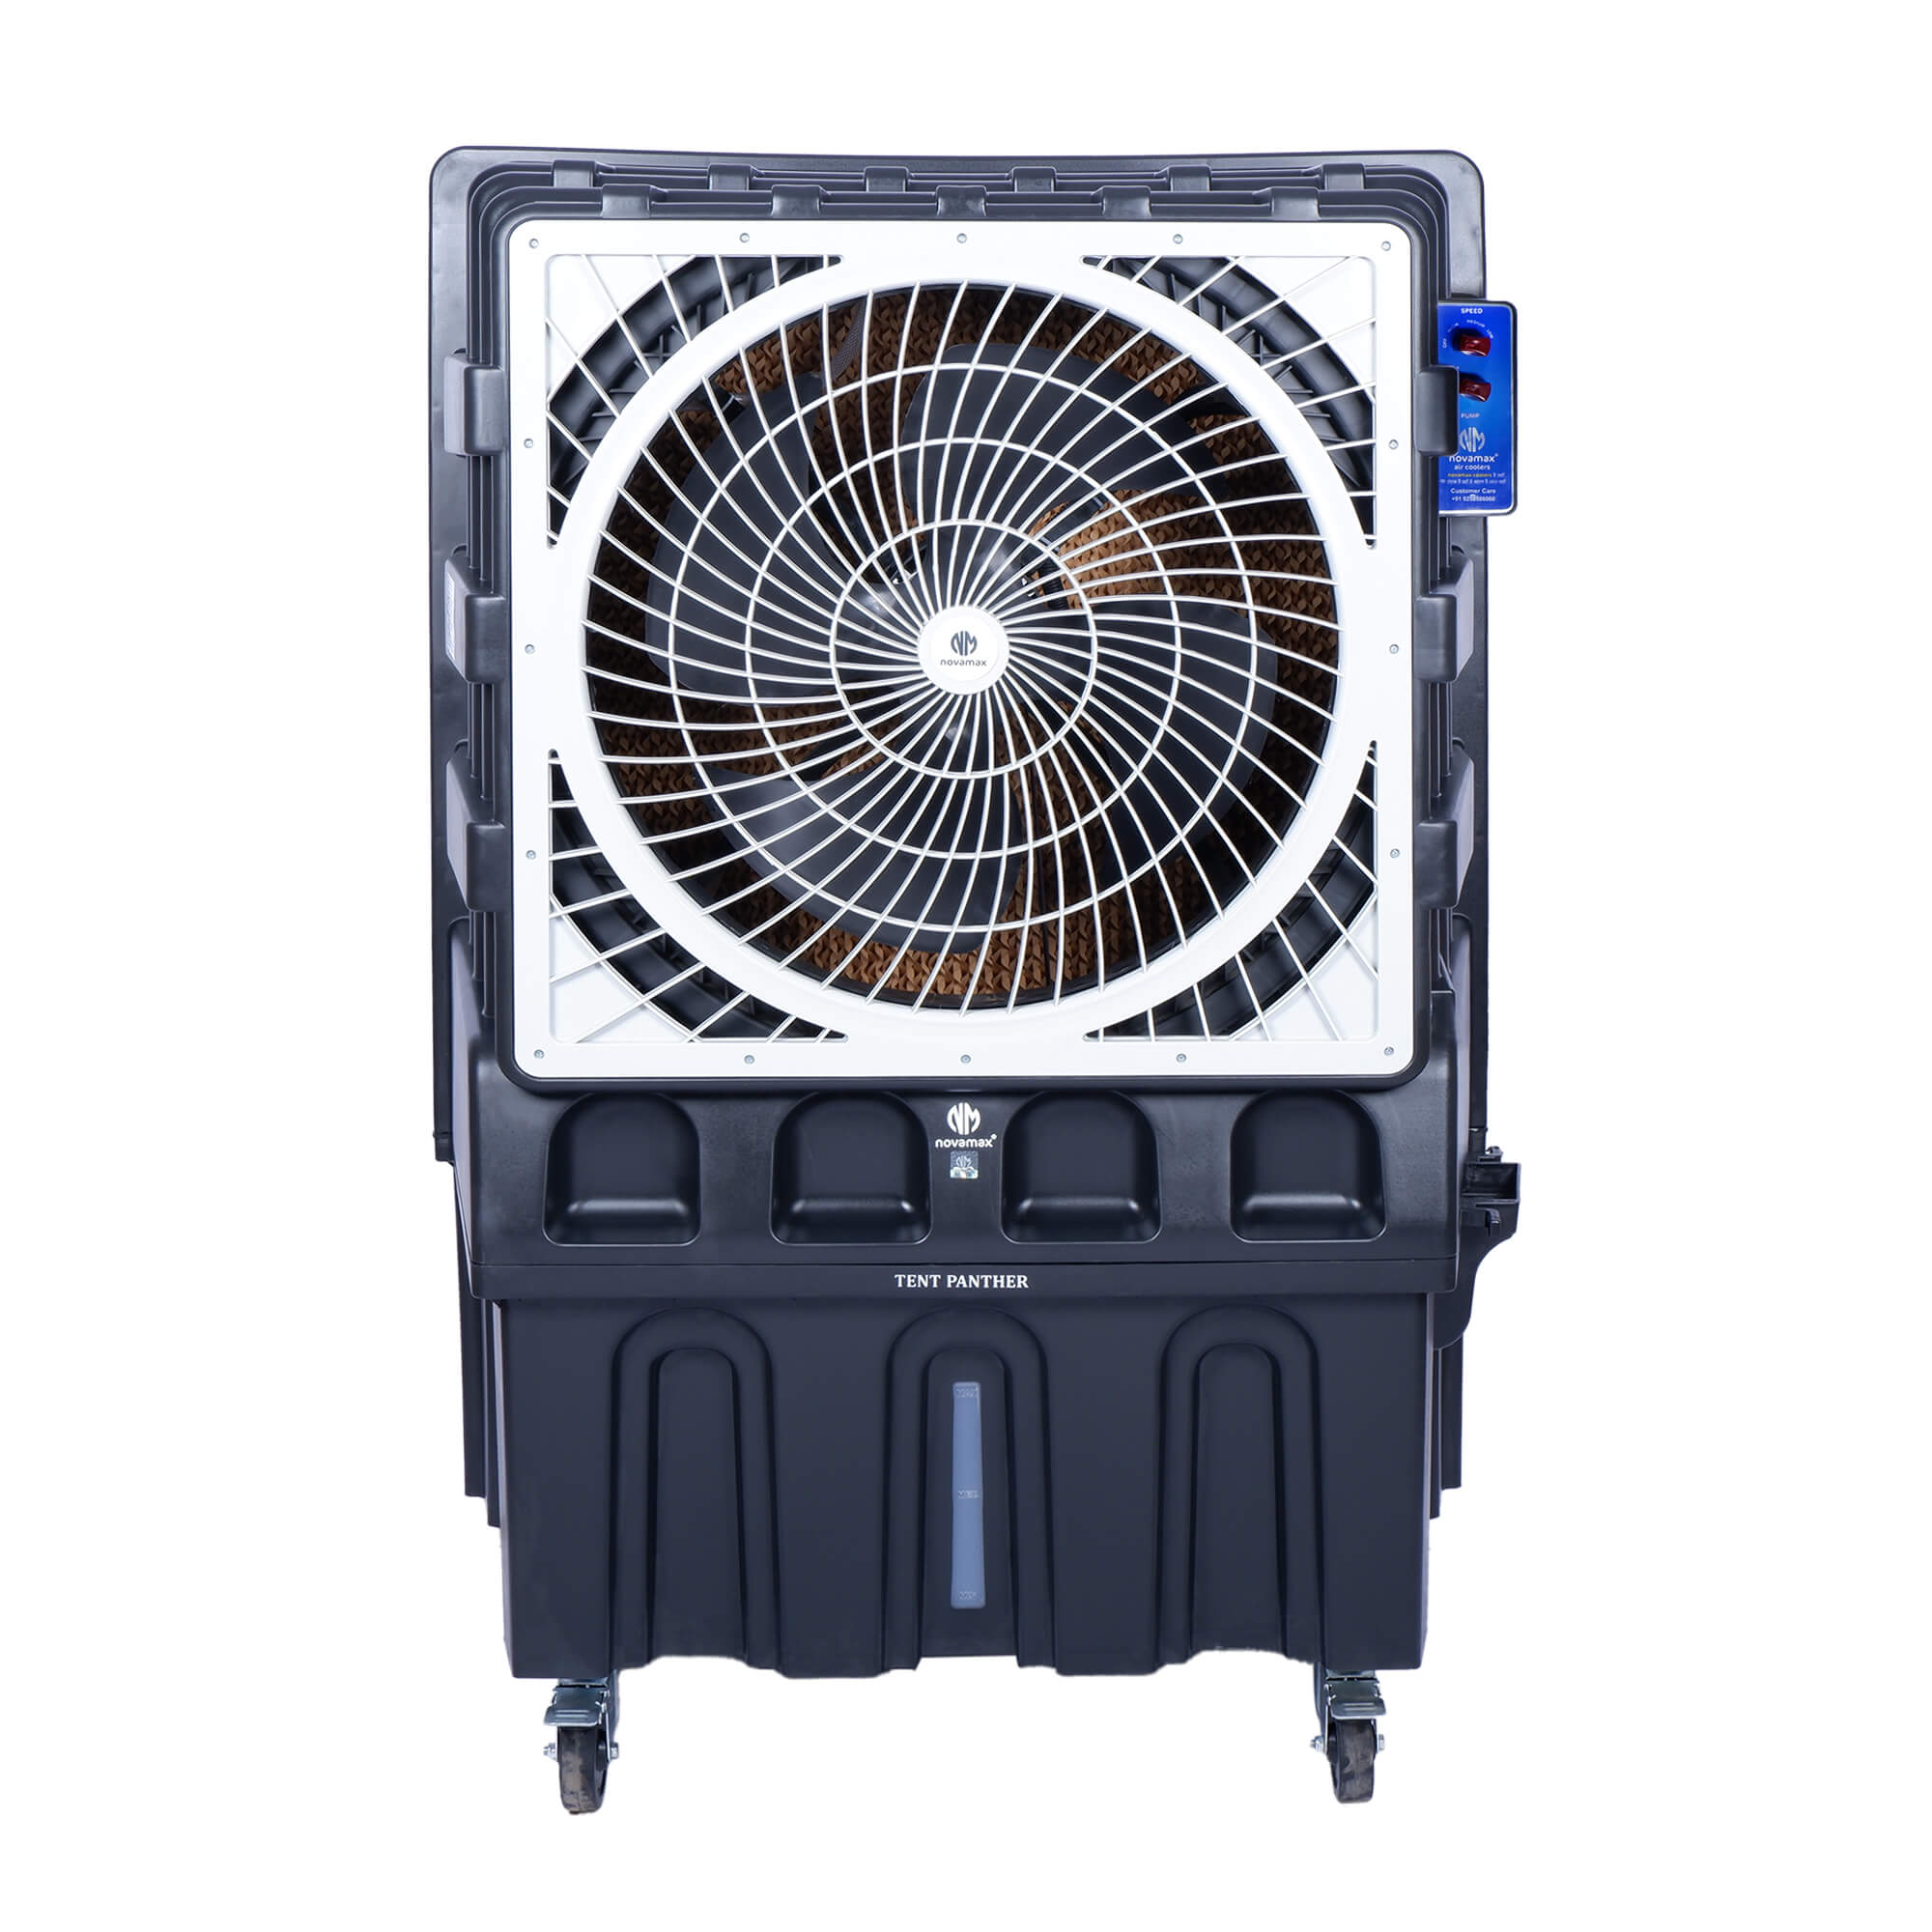 Novamax 150 L Desert Air Cooler  (Grey, Tent Panther for Hall/Banquet/Commercial Space, Powerful Air Throw of 175 Ft.)